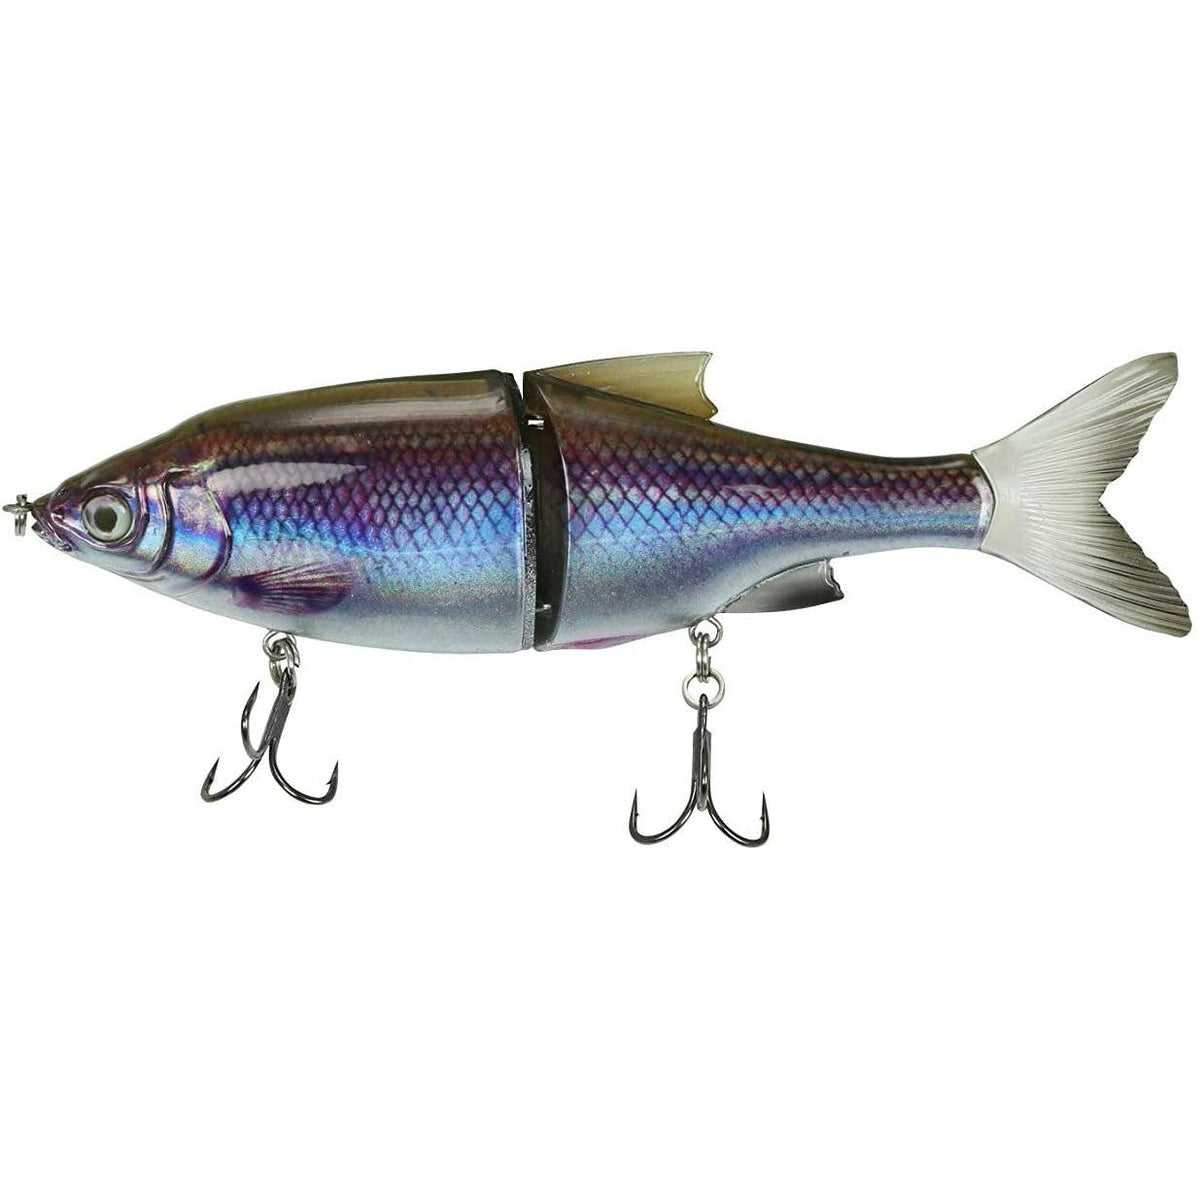 Tackle Express - Saltwater and Freshwater Fishing Tackle Shop